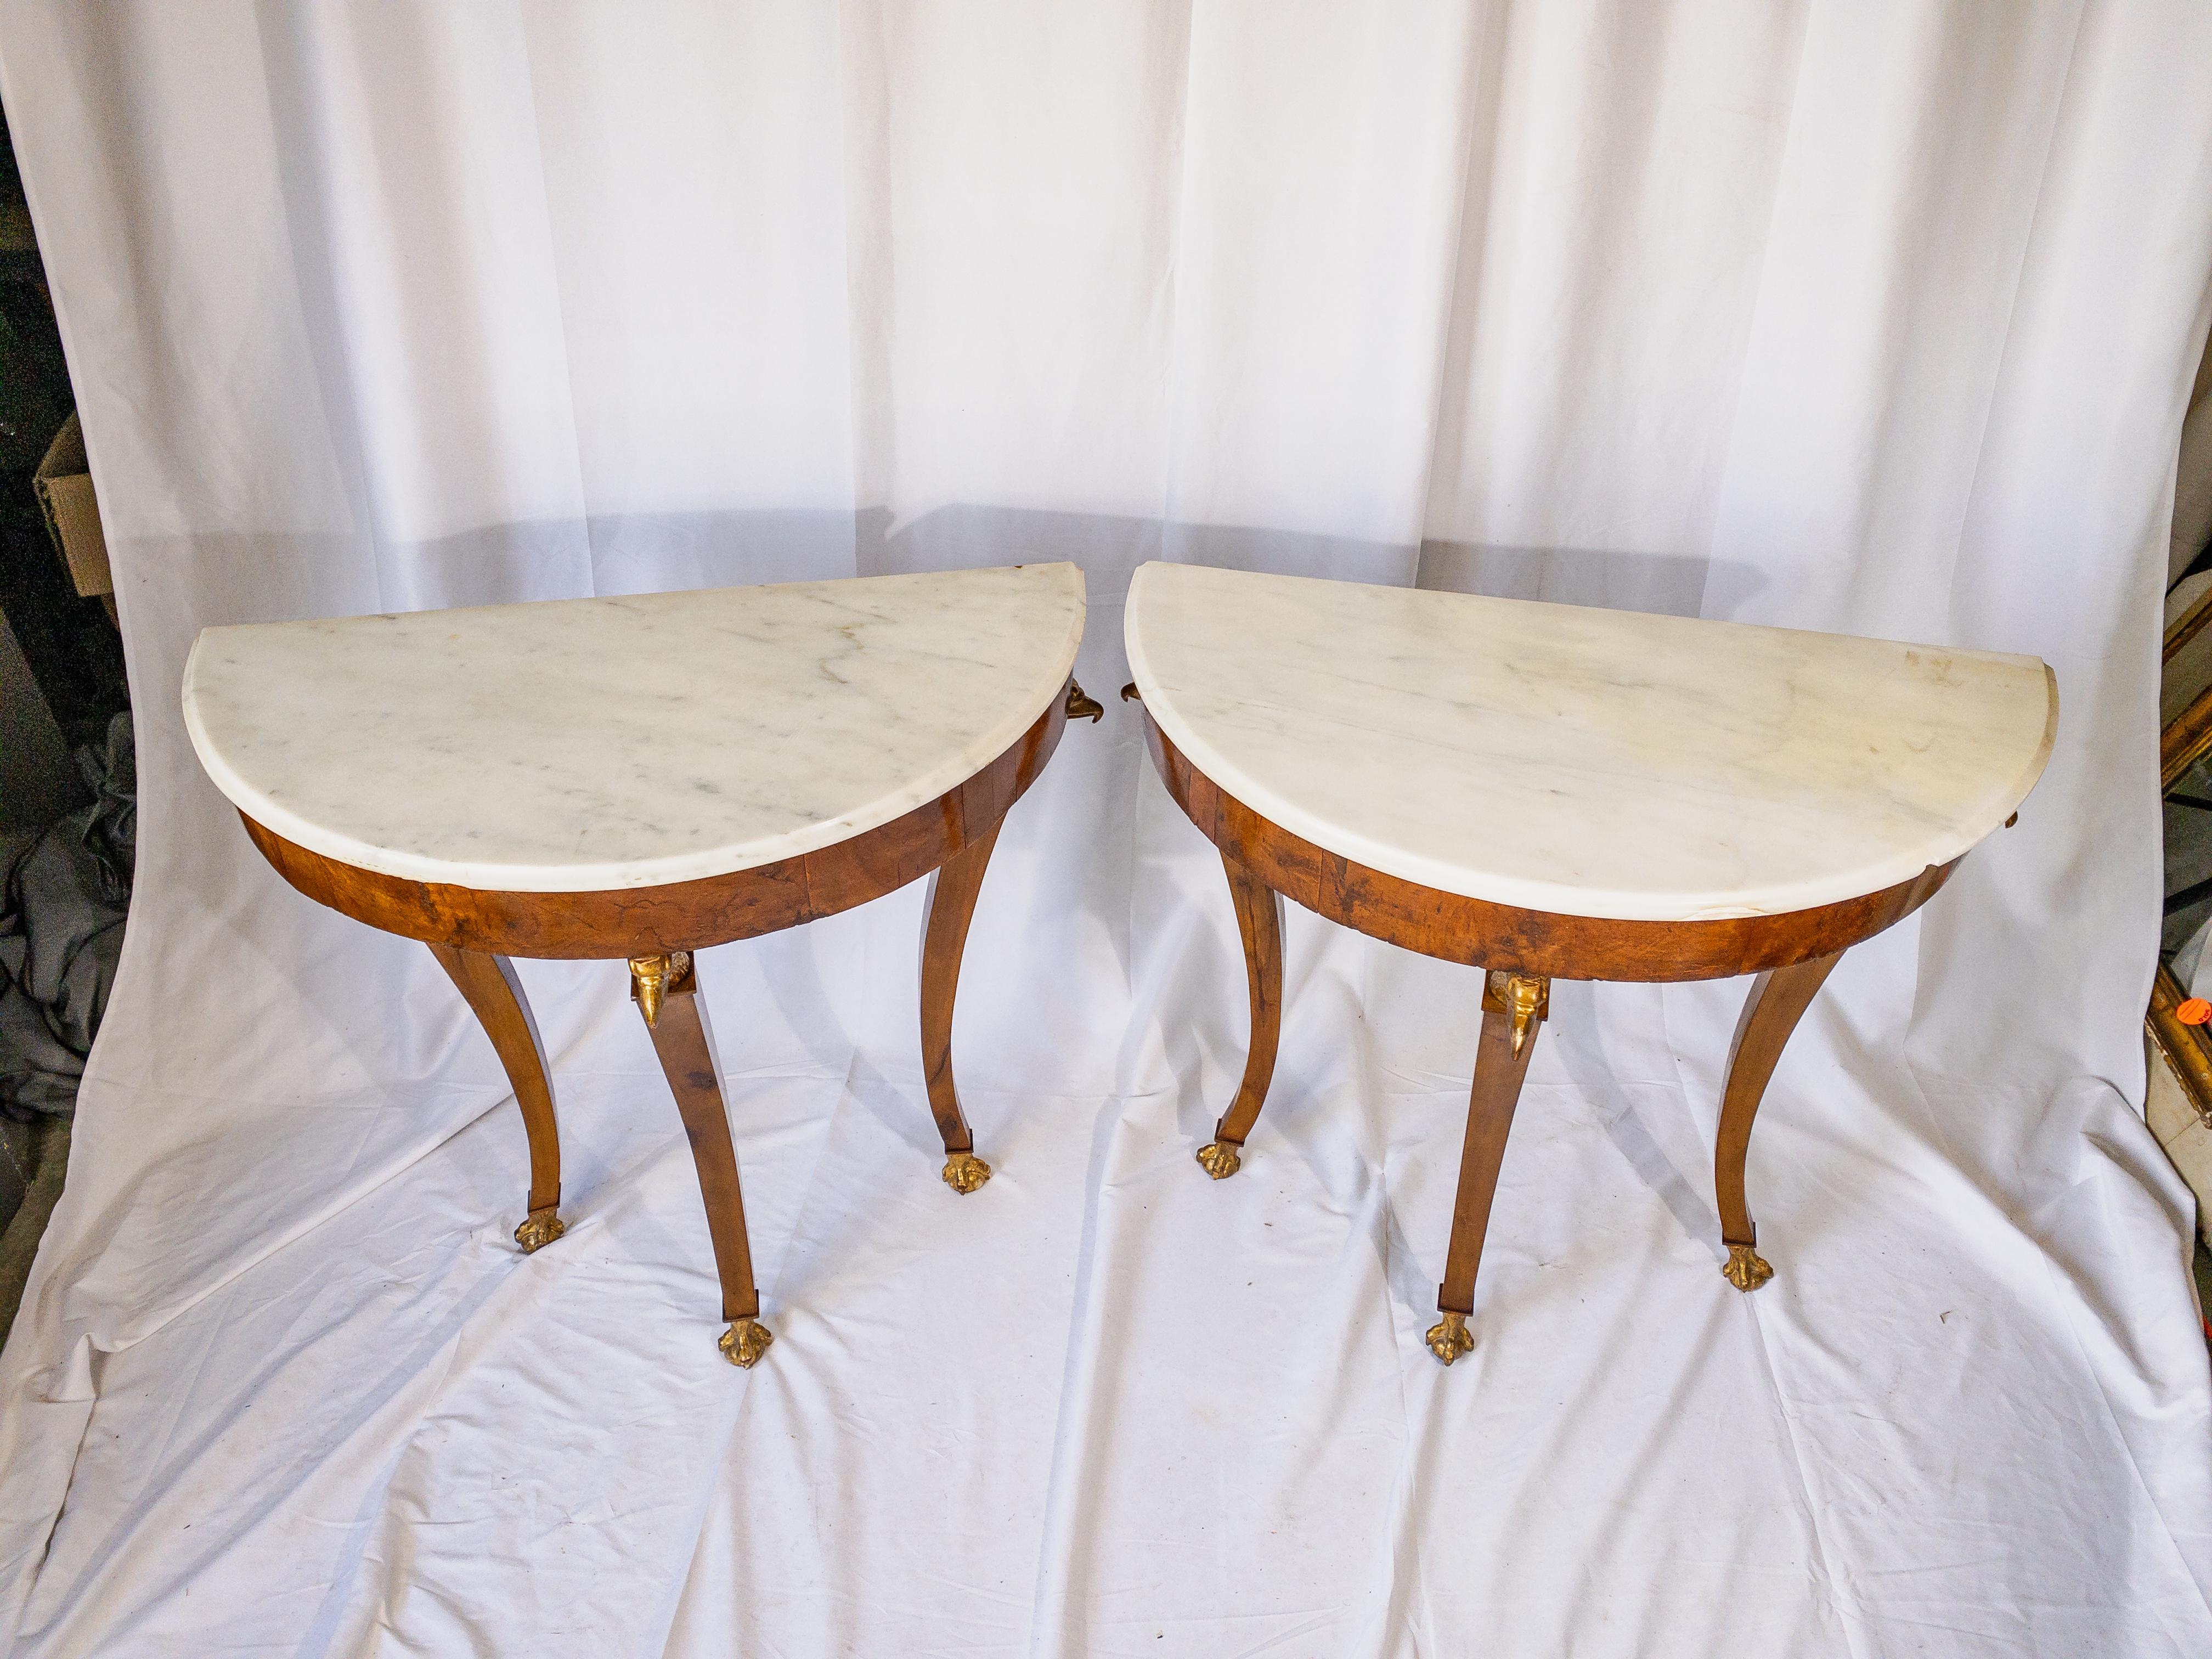 Pair of 18th Century Italian Marble Top Demi-lune Tables For Sale 5